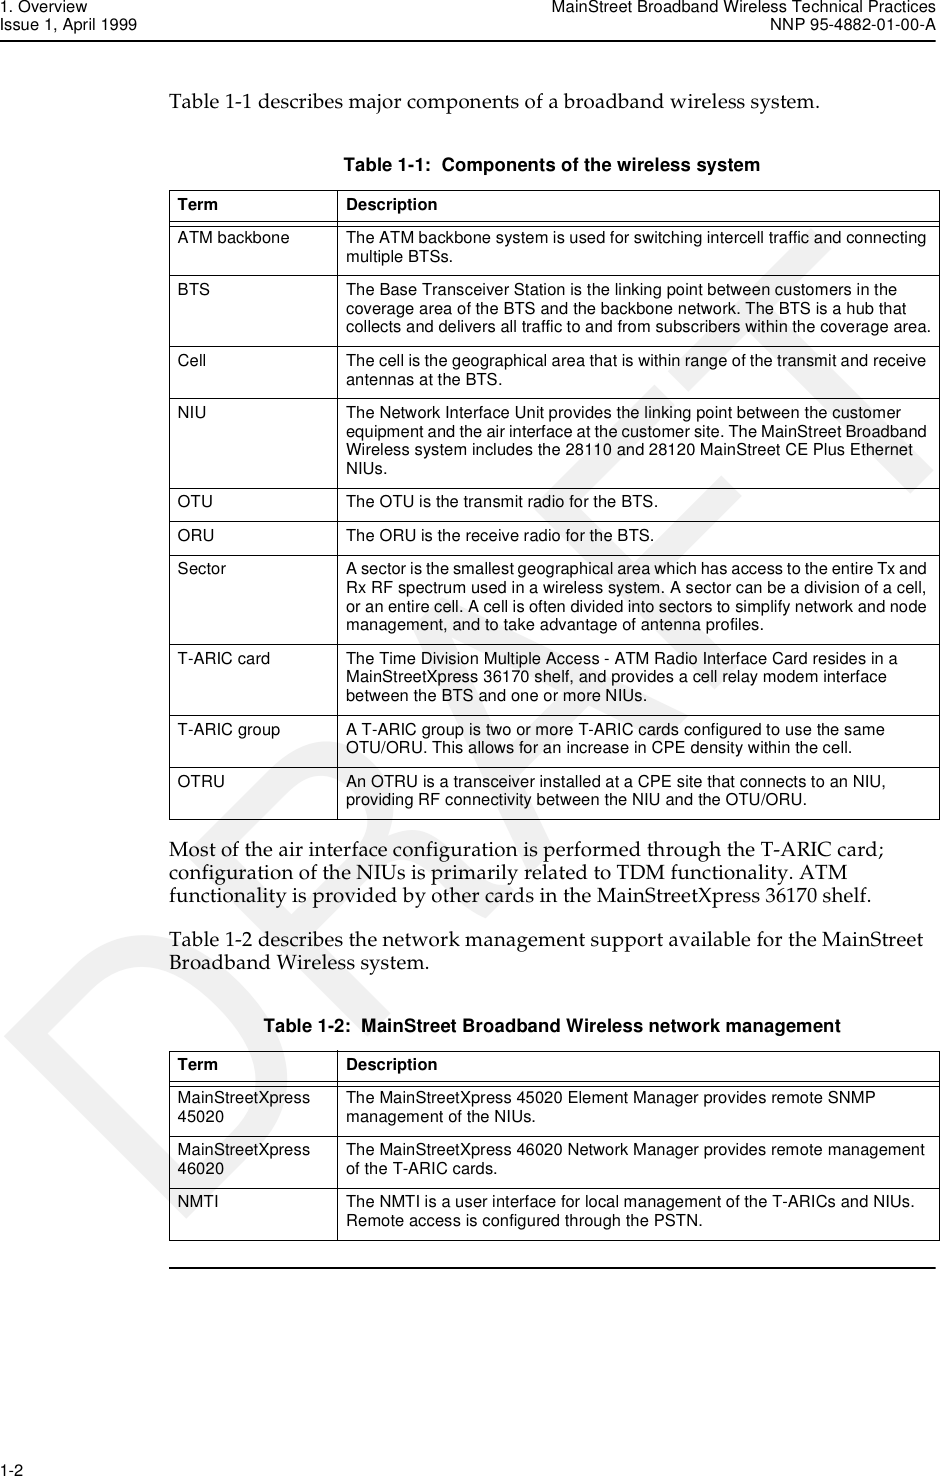 1. Overview MainStreet Broadband Wireless Technical PracticesIssue 1, April 1999 NNP 95-4882-01-00-A1-2   DRAFTTable 1-1 describes major components of a broadband wireless system.Table 1-1:  Components of the wireless systemMost of the air interface configuration is performed through the T-ARIC card; configuration of the NIUs is primarily related to TDM functionality. ATM functionality is provided by other cards in the MainStreetXpress 36170 shelf.Table 1-2 describes the network management support available for the MainStreet Broadband Wireless system.Table 1-2:  MainStreet Broadband Wireless network managementTerm DescriptionATM backbone The ATM backbone system is used for switching intercell traffic and connecting multiple BTSs.BTS The Base Transceiver Station is the linking point between customers in the coverage area of the BTS and the backbone network. The BTS is a hub that collects and delivers all traffic to and from subscribers within the coverage area.Cell The cell is the geographical area that is within range of the transmit and receive antennas at the BTS.NIU The Network Interface Unit provides the linking point between the customer equipment and the air interface at the customer site. The MainStreet Broadband Wireless system includes the 28110 and 28120 MainStreet CE Plus Ethernet NIUs.OTU The OTU is the transmit radio for the BTS. ORU The ORU is the receive radio for the BTS. Sector A sector is the smallest geographical area which has access to the entire Tx and Rx RF spectrum used in a wireless system. A sector can be a division of a cell, or an entire cell. A cell is often divided into sectors to simplify network and node management, and to take advantage of antenna profiles. T-ARIC card The Time Division Multiple Access - ATM Radio Interface Card resides in a MainStreetXpress 36170 shelf, and provides a cell relay modem interface between the BTS and one or more NIUs.T-ARIC group A T-ARIC group is two or more T-ARIC cards configured to use the same OTU/ORU. This allows for an increase in CPE density within the cell.OTRU An OTRU is a transceiver installed at a CPE site that connects to an NIU, providing RF connectivity between the NIU and the OTU/ORU. Term DescriptionMainStreetXpress 45020 The MainStreetXpress 45020 Element Manager provides remote SNMP management of the NIUs.MainStreetXpress 46020 The MainStreetXpress 46020 Network Manager provides remote management of the T-ARIC cards.NMTI The NMTI is a user interface for local management of the T-ARICs and NIUs. Remote access is configured through the PSTN.